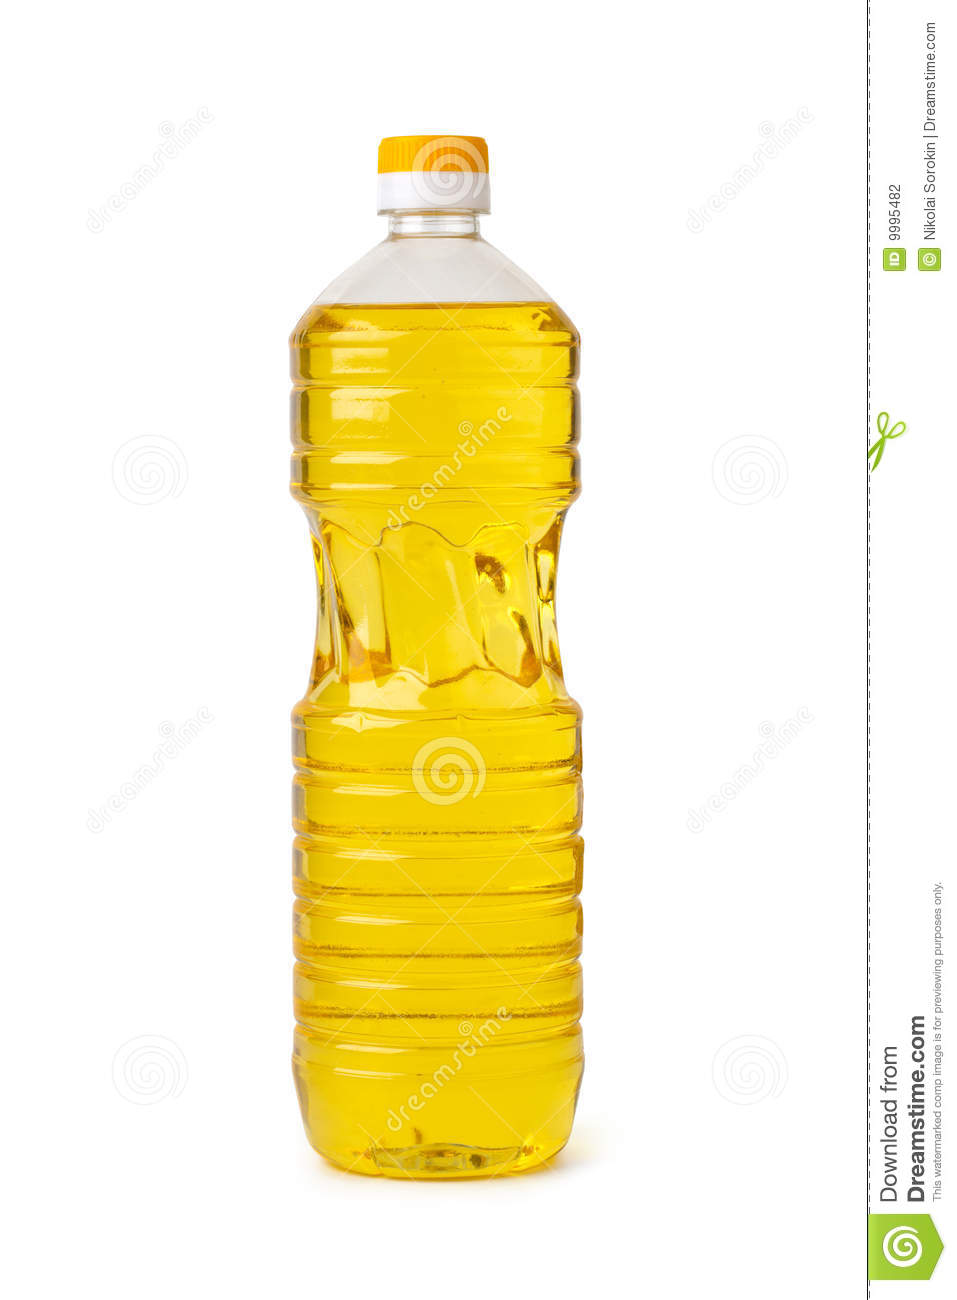 Cooking Oil Clipart Bottle Of Cooking Oil Isolated